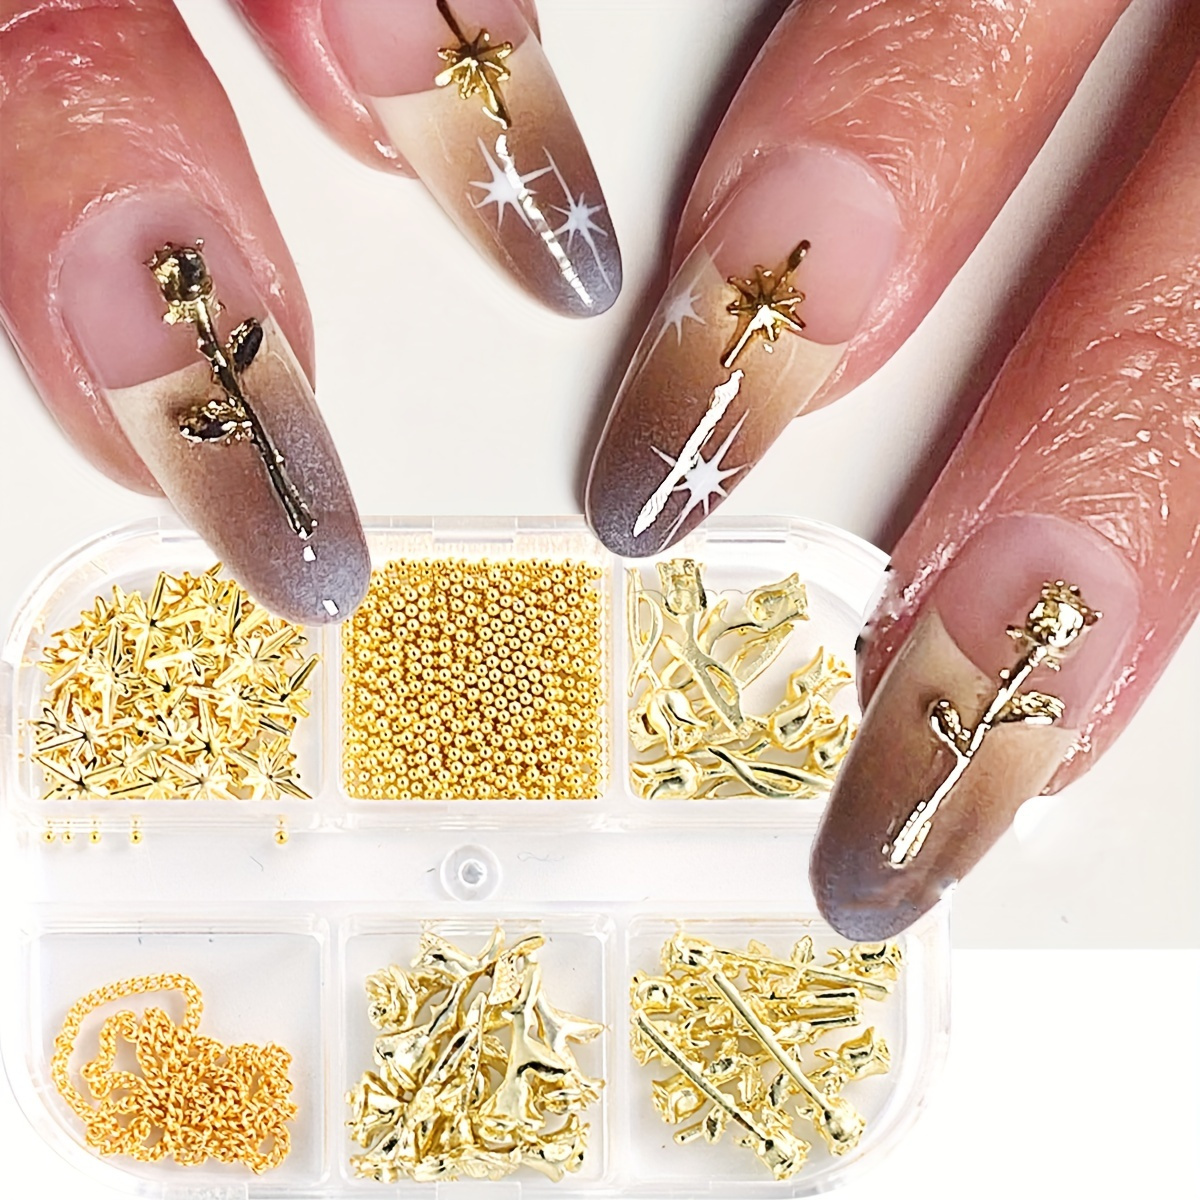 6 Boxes 3D Flower Nail Art Charms Light Change Nail Decals for Acrylic Nail  Art Accessories With Pearl Golden Caviar Beads Glitter Nail Supplies Stud